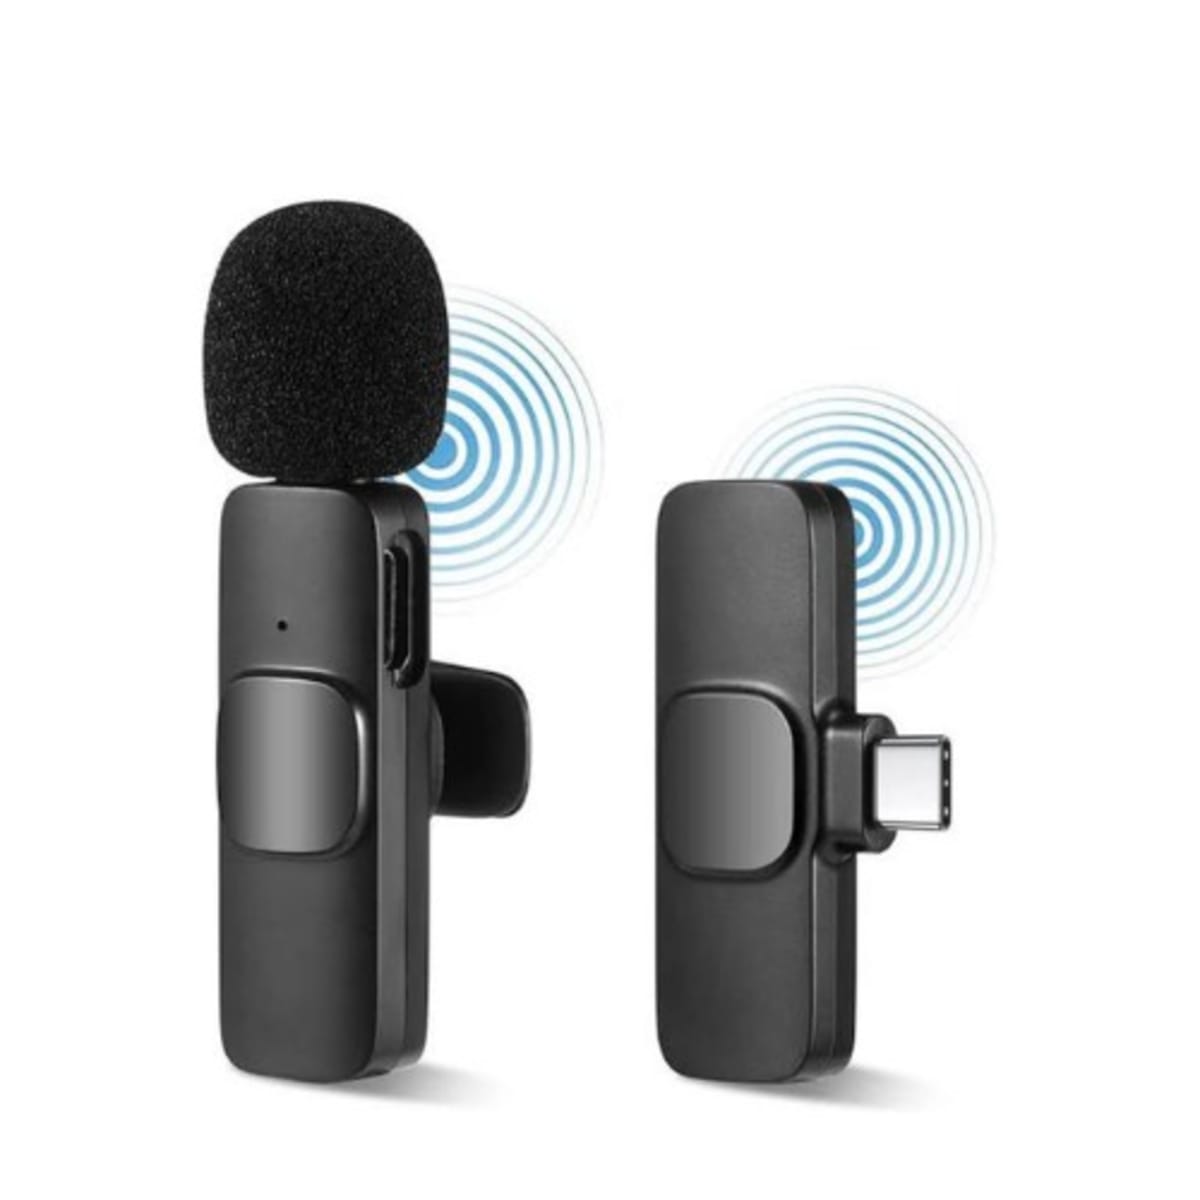 K9 Wireless Microphone For Type-C Android Only